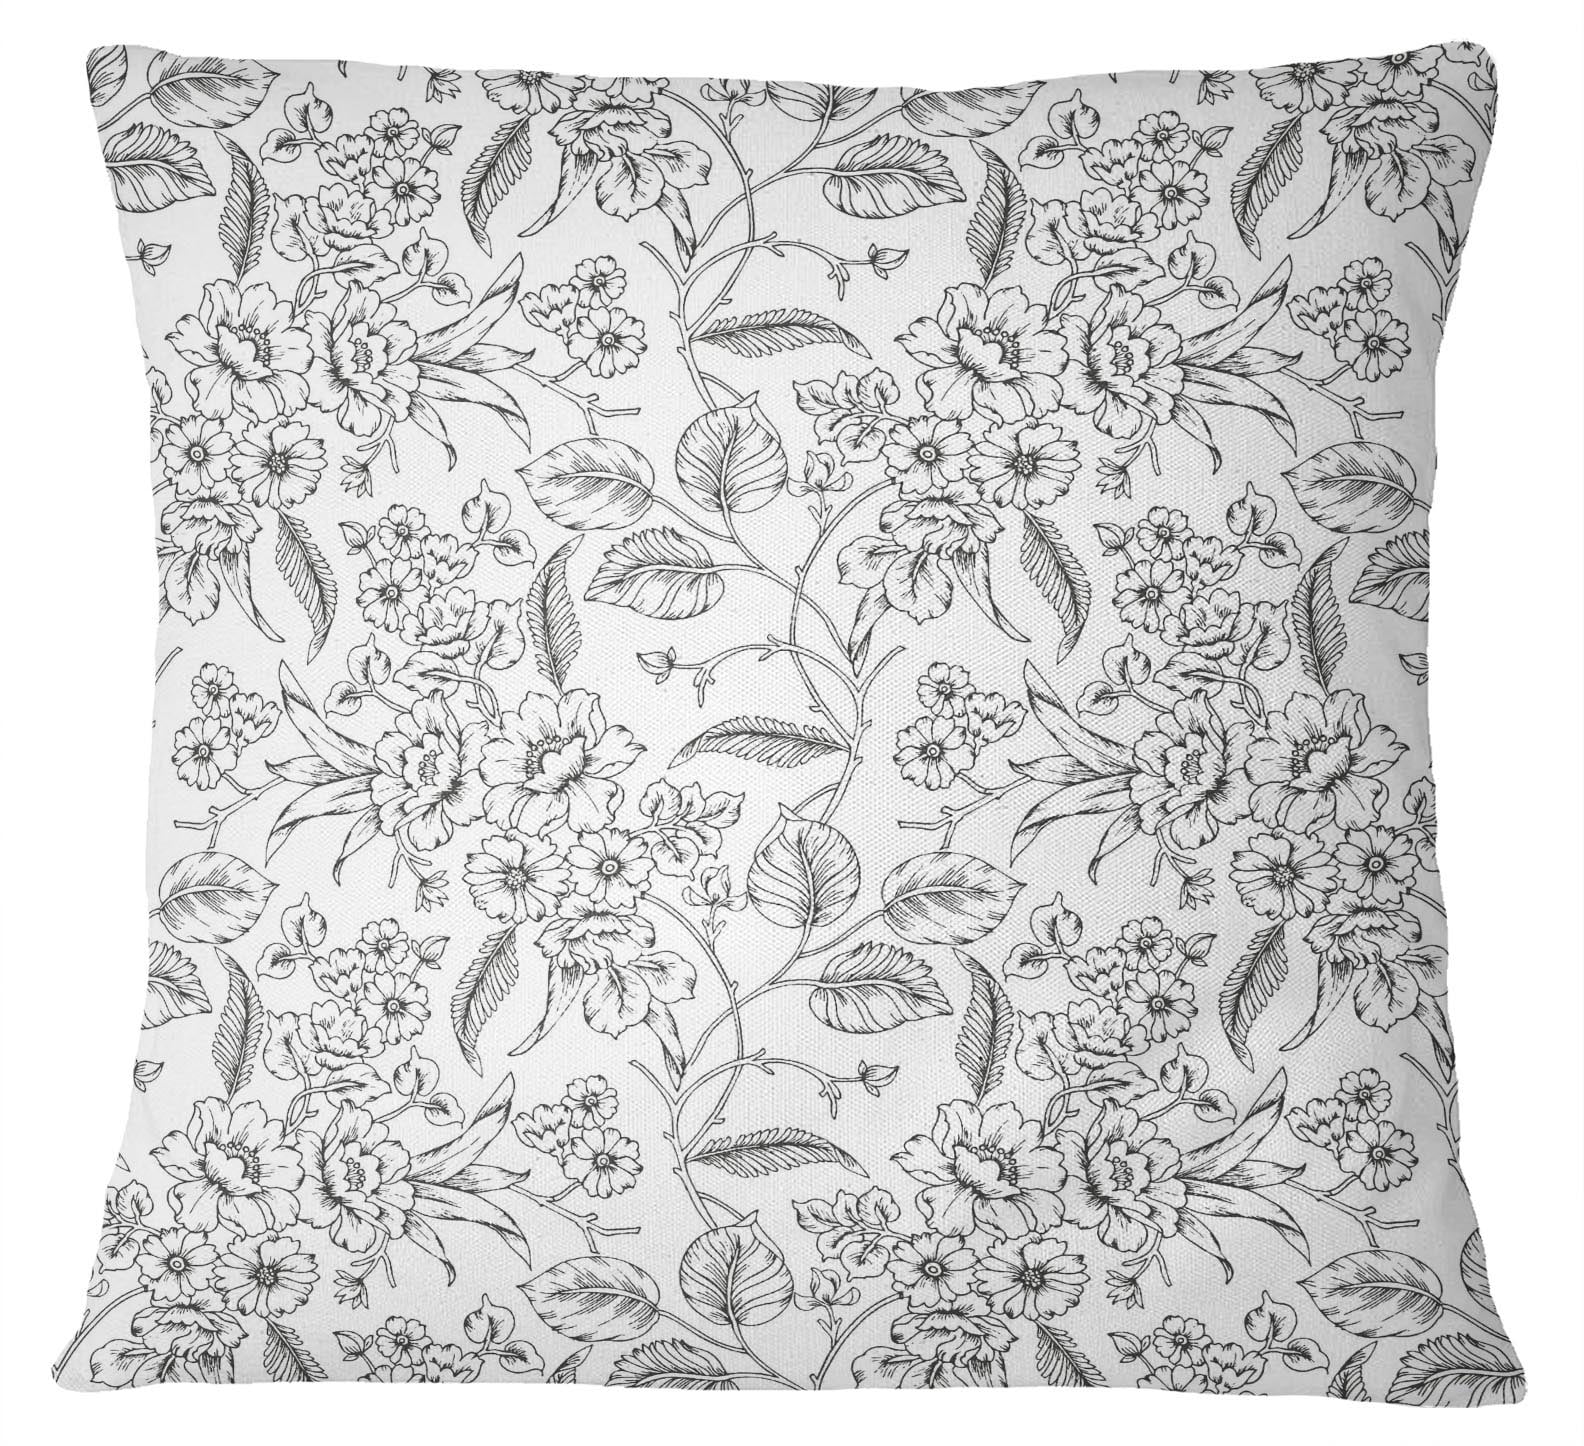 S4Sassy Floral Printed Pillow Cover Decorative White Cushion Cover Throw 